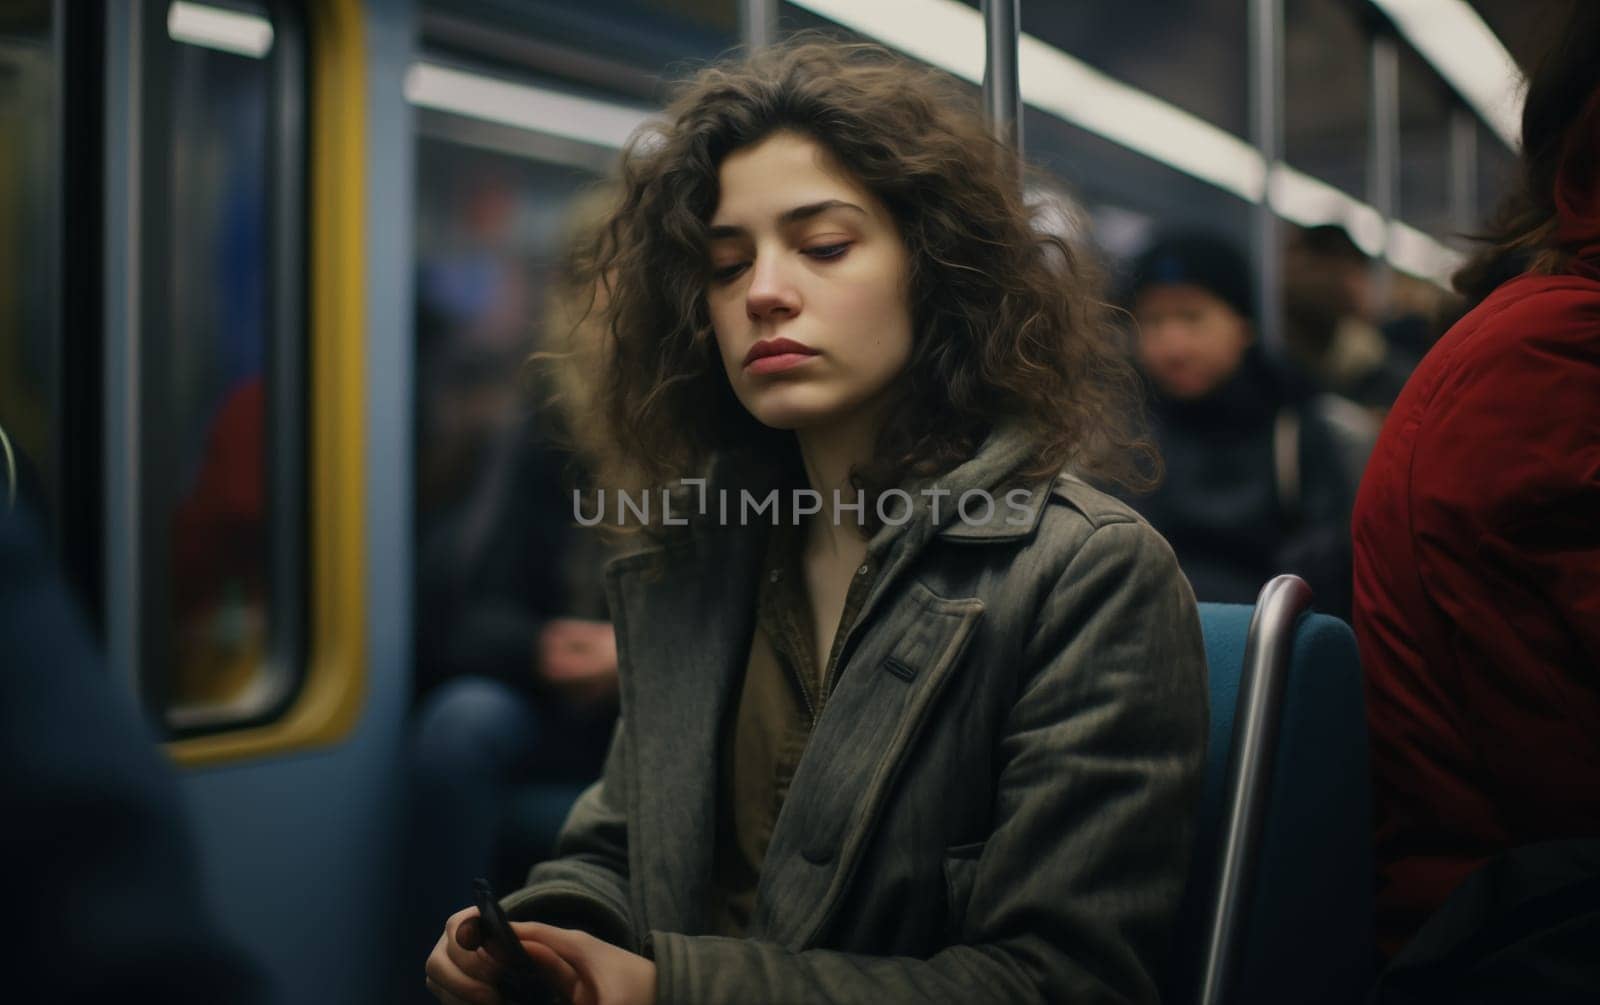 A tired woman rides public transportation and sleeps. Generation Ai